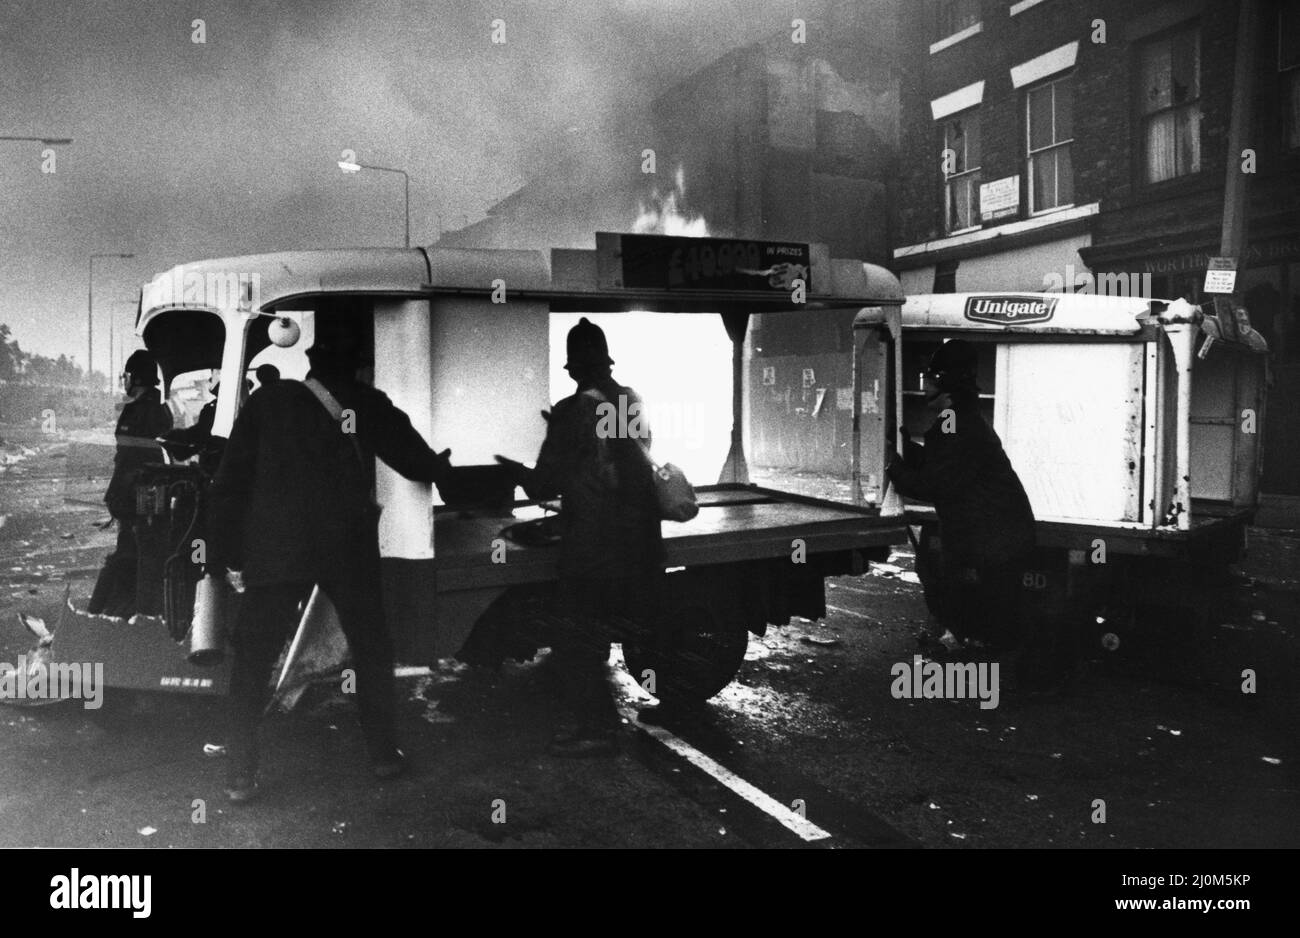 Toxteth Riot 6th July 1981Police officers try to clear a road block of milk floats on Park Road so the fire brigade can control the fire raging in looted shops further up the road.. The riots was sparked following the interception by police of motorcyclists Leroy Cooper in Selbourne Street. A crowd gathered, name-calling grew into jostling and within minutes there was a full-scale fracas that saw three police officers hurt and a young local man, arrested on assault charges. It did not stop there. Police mounted extra patrols in the area and early the following evening, July 4, they came under Stock Photo